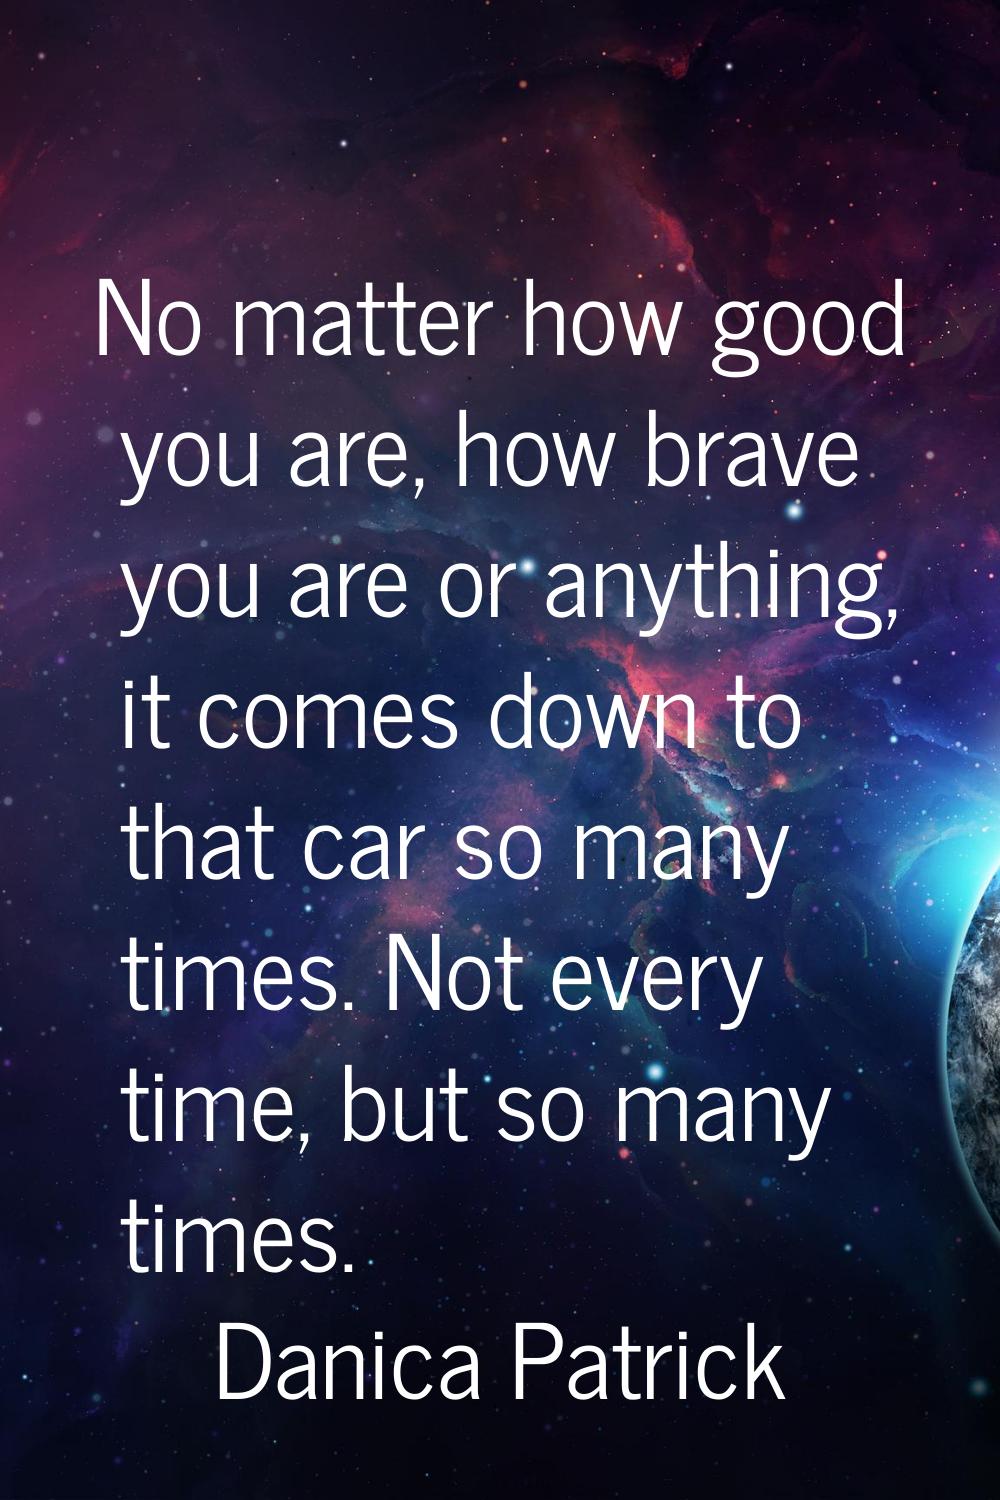 No matter how good you are, how brave you are or anything, it comes down to that car so many times.